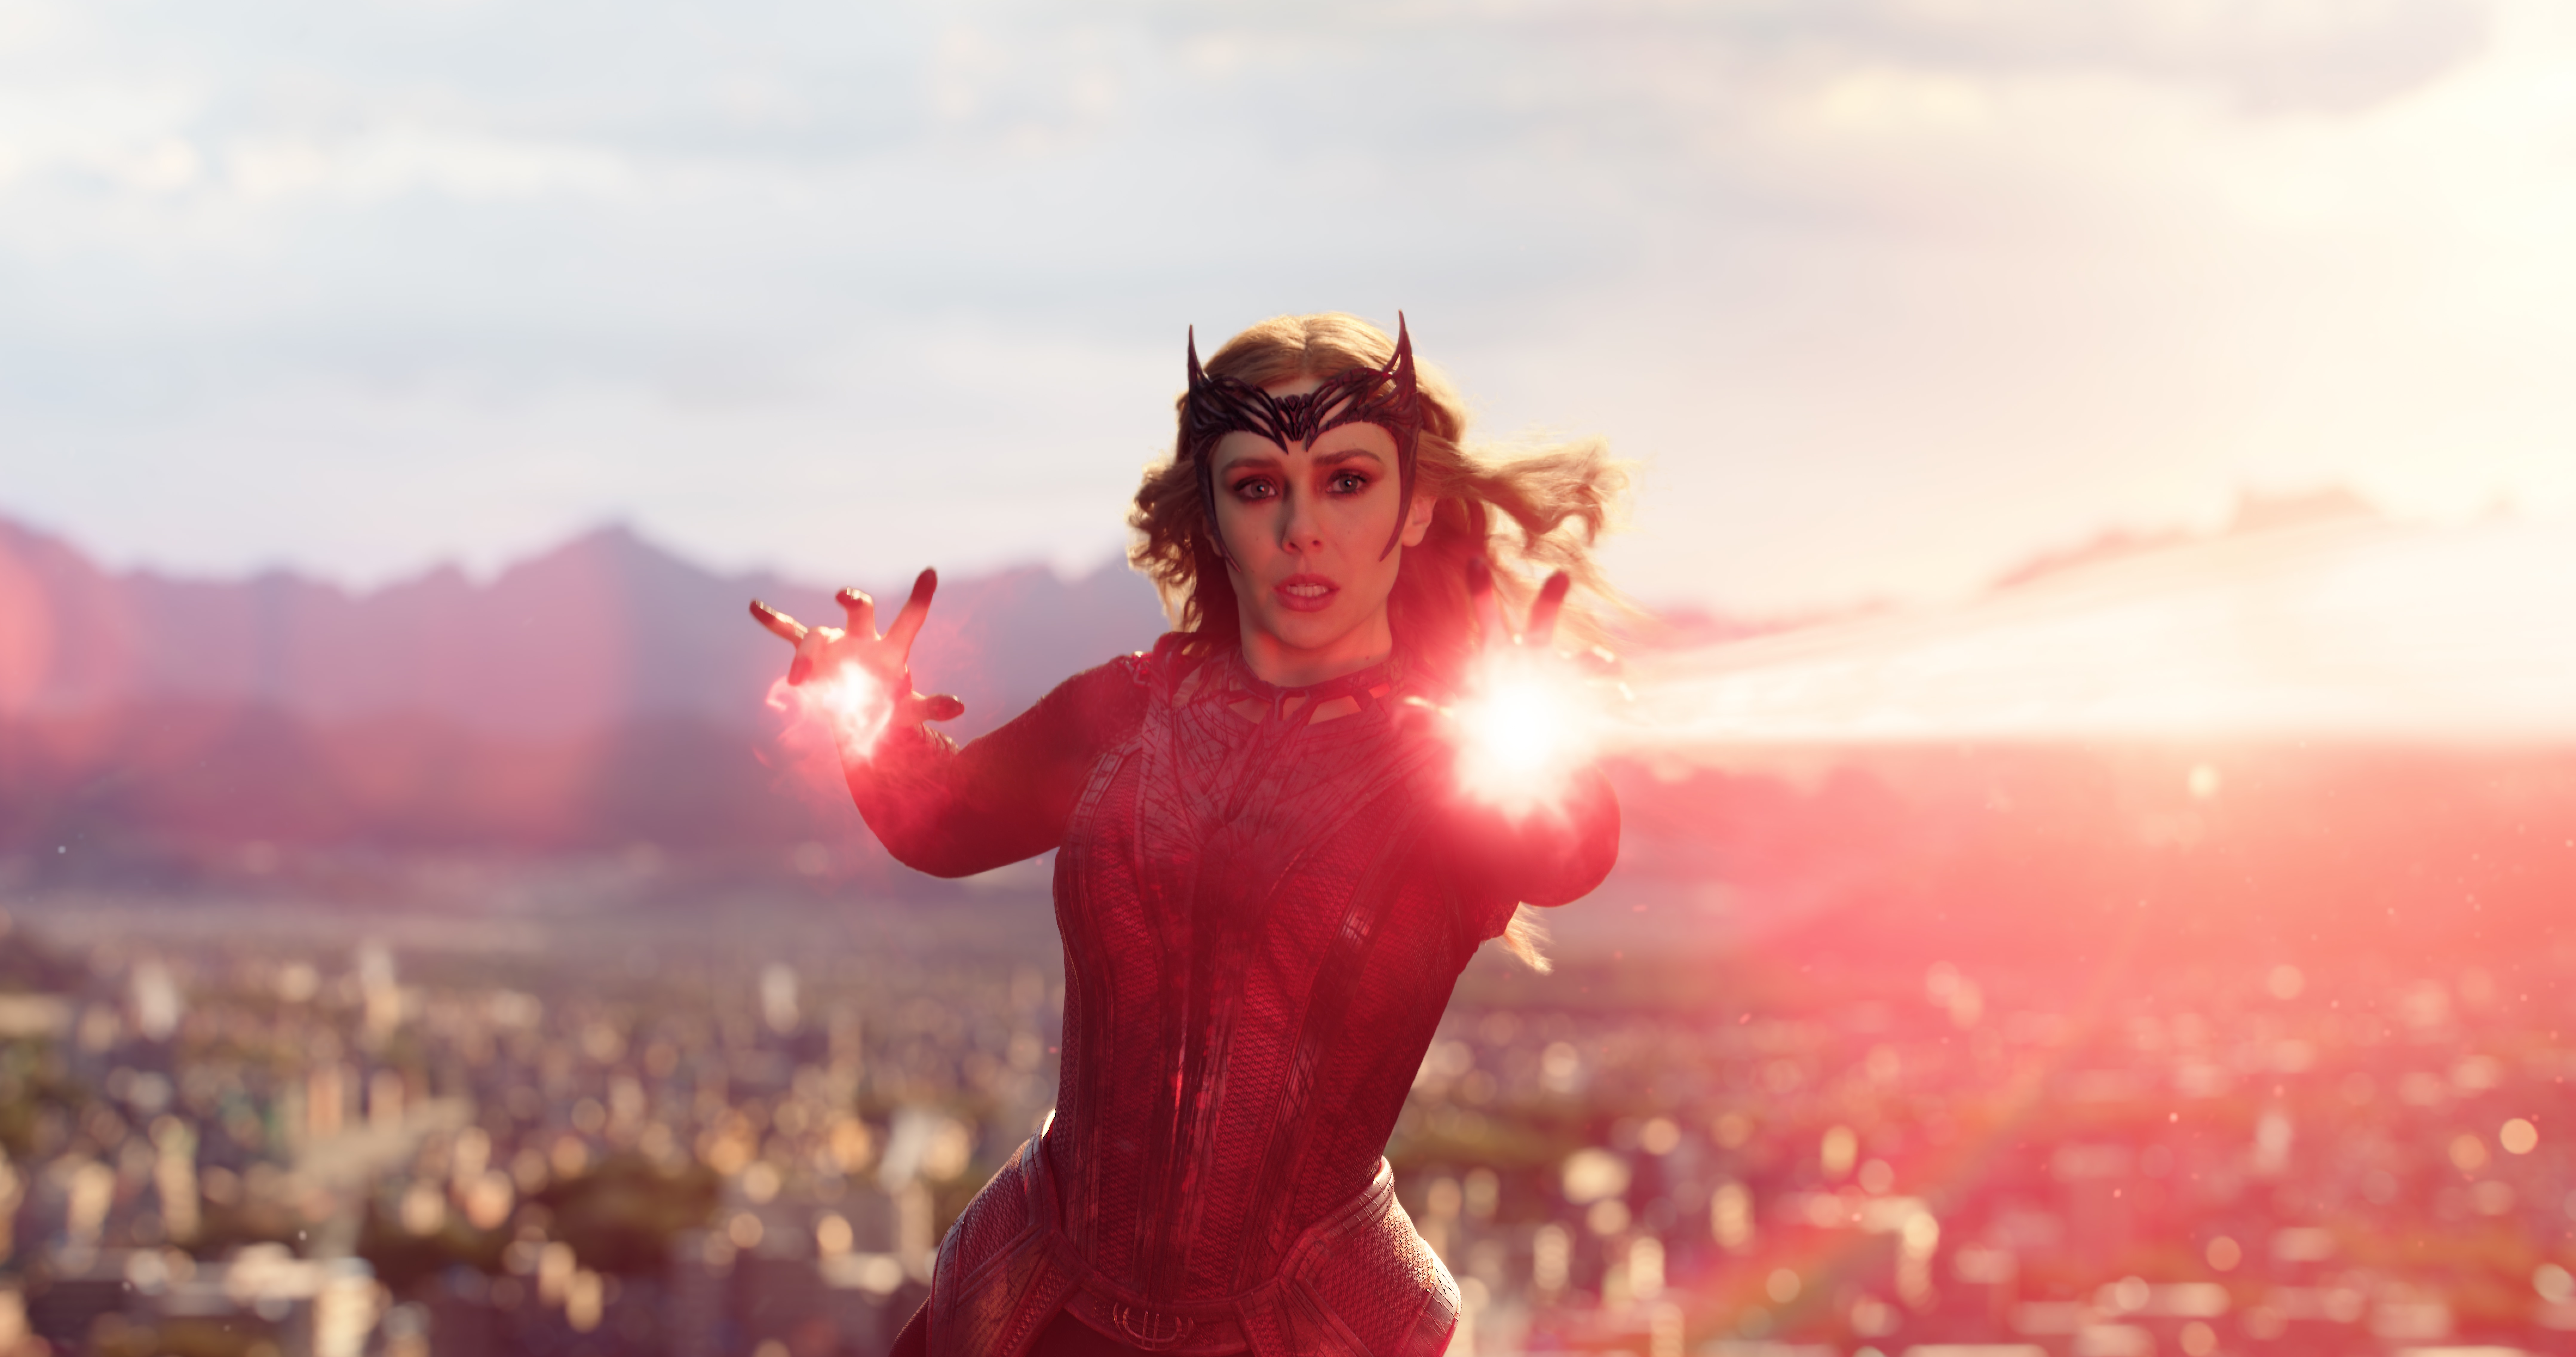 Scarlet Witch shoots a red beam of energy at someone off screen.